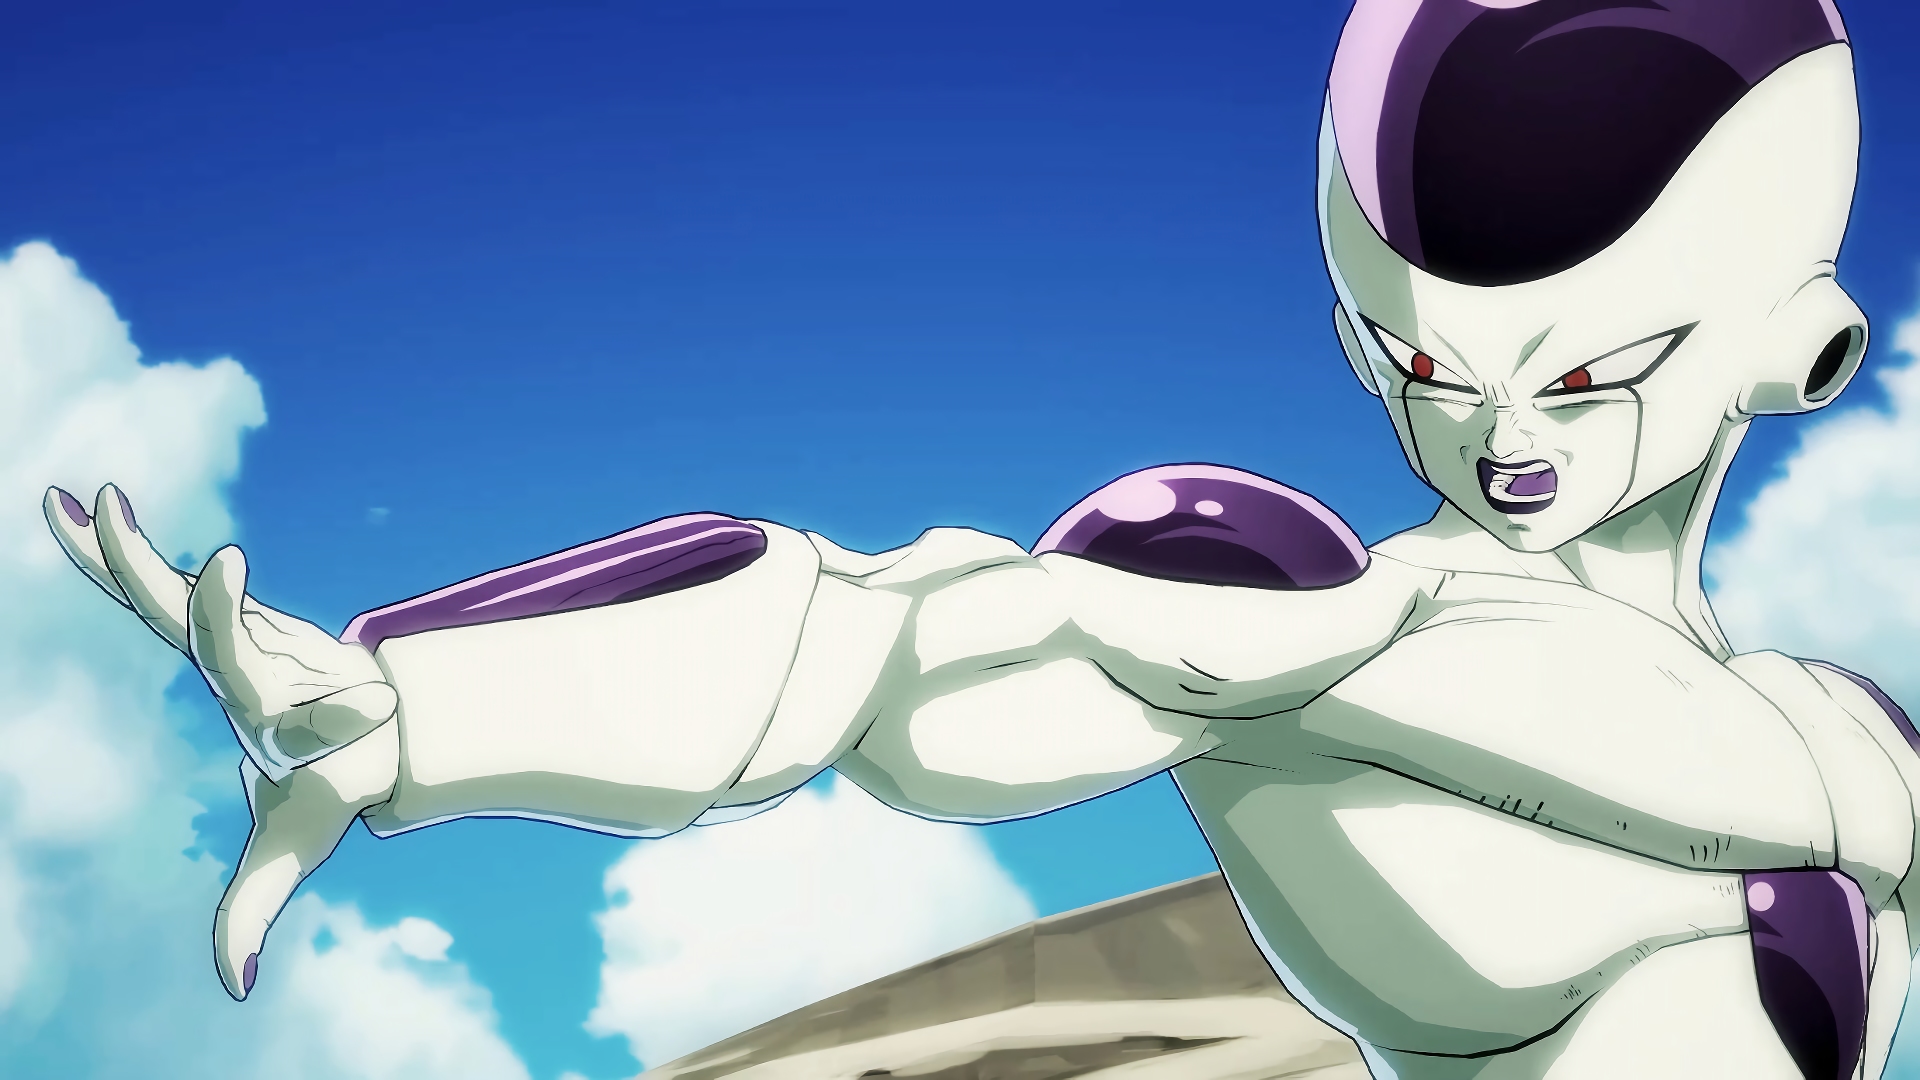 HD Frieza Dragon Ball Fighterz Video Game